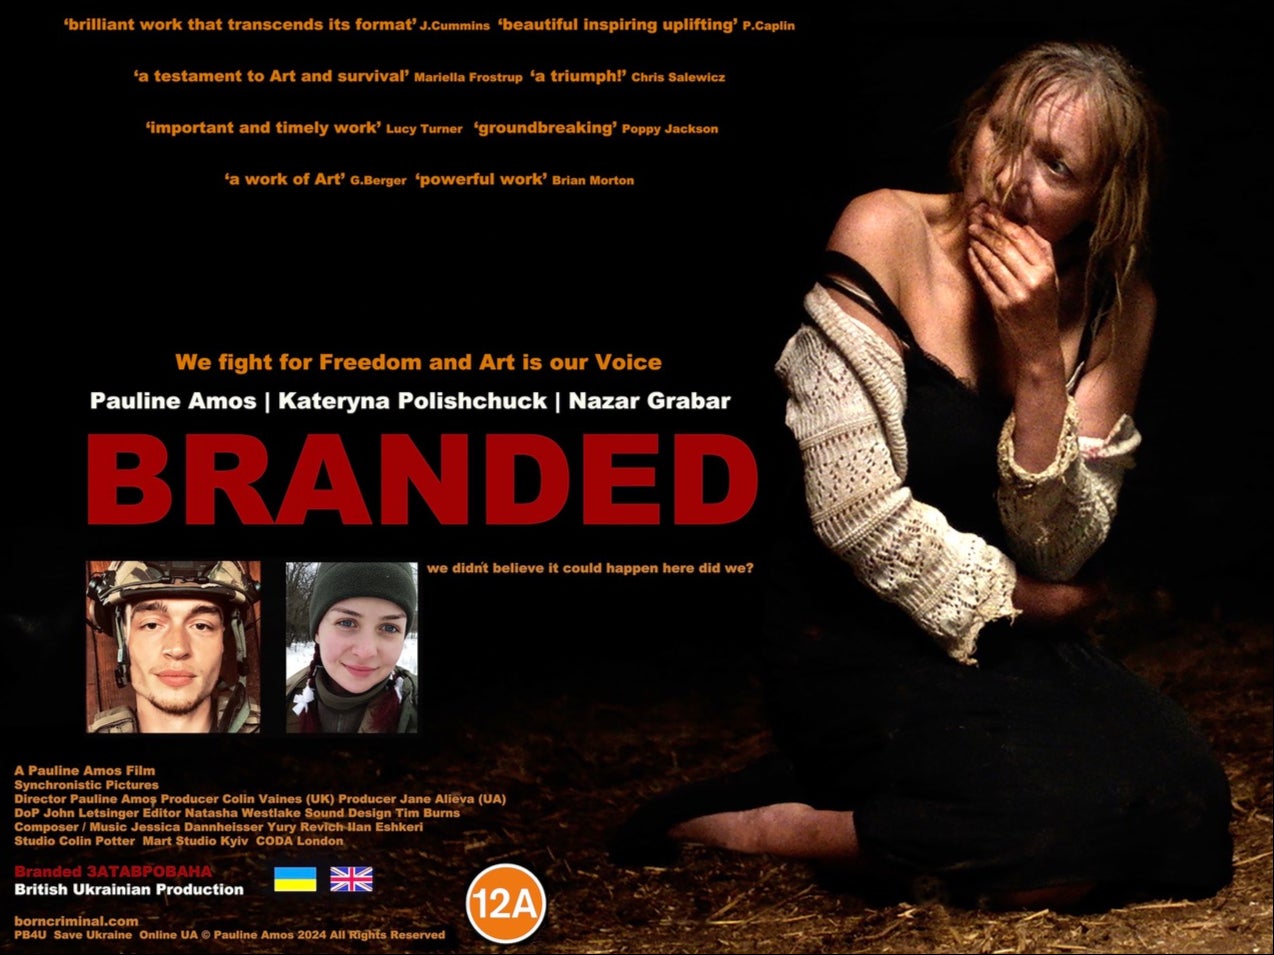 The film poster for ‘Branded’